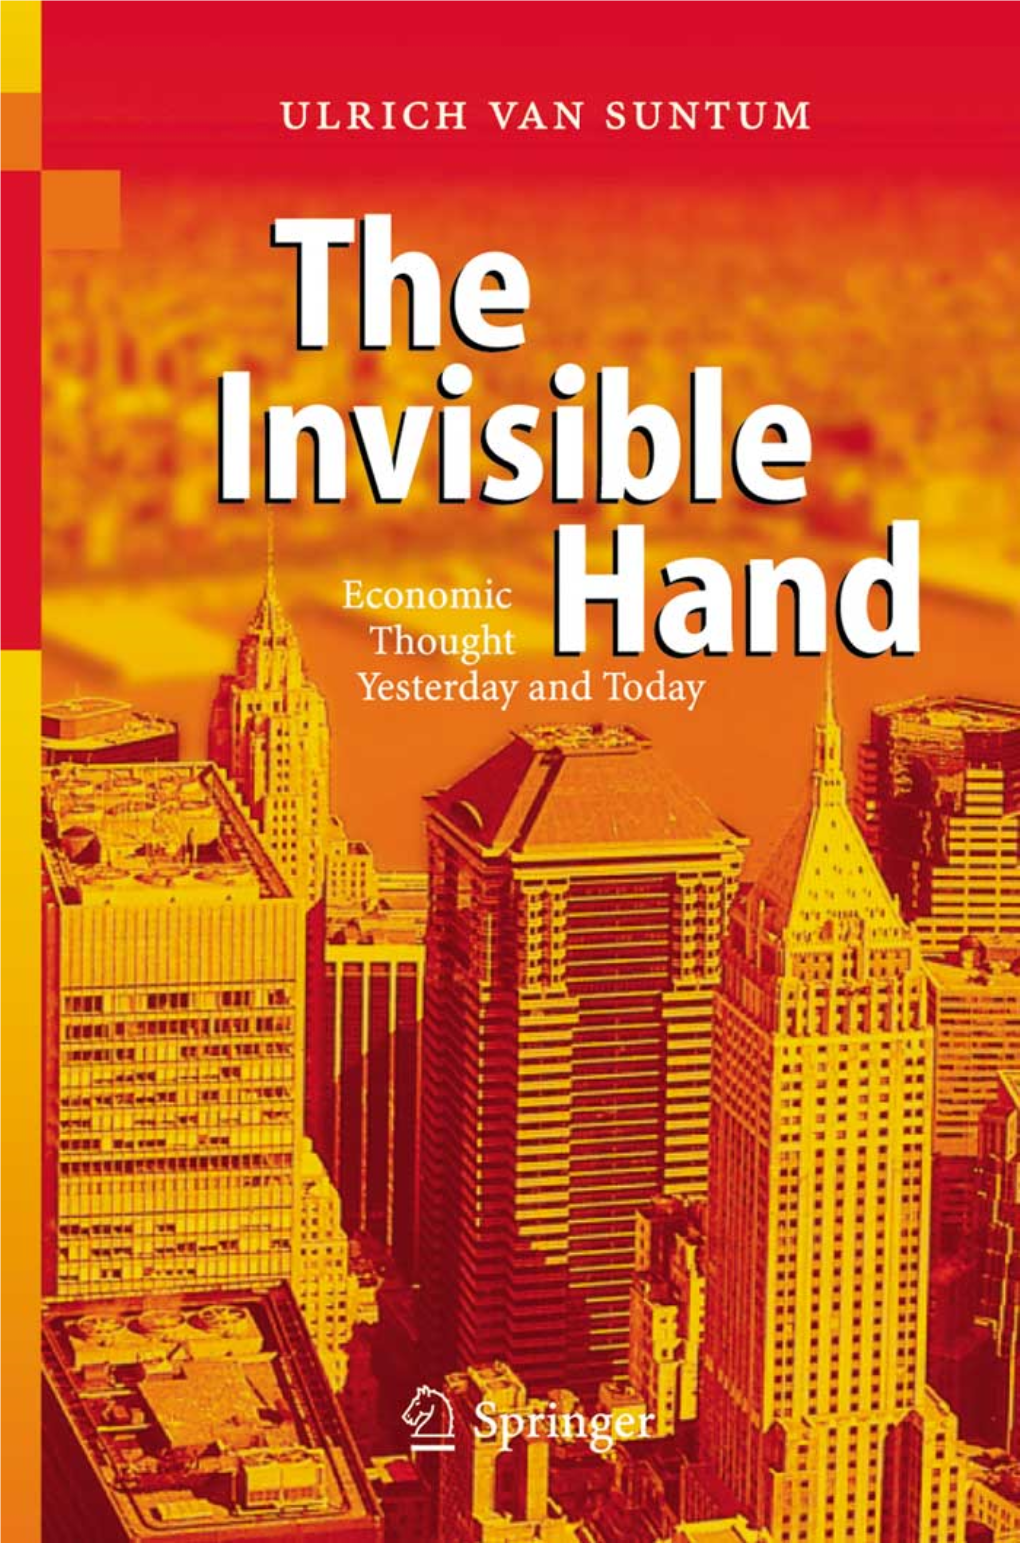 The Invisible Hand Ulrich Van Suntum the INVISIBLE HAND Economic Thought Yesterday and Today